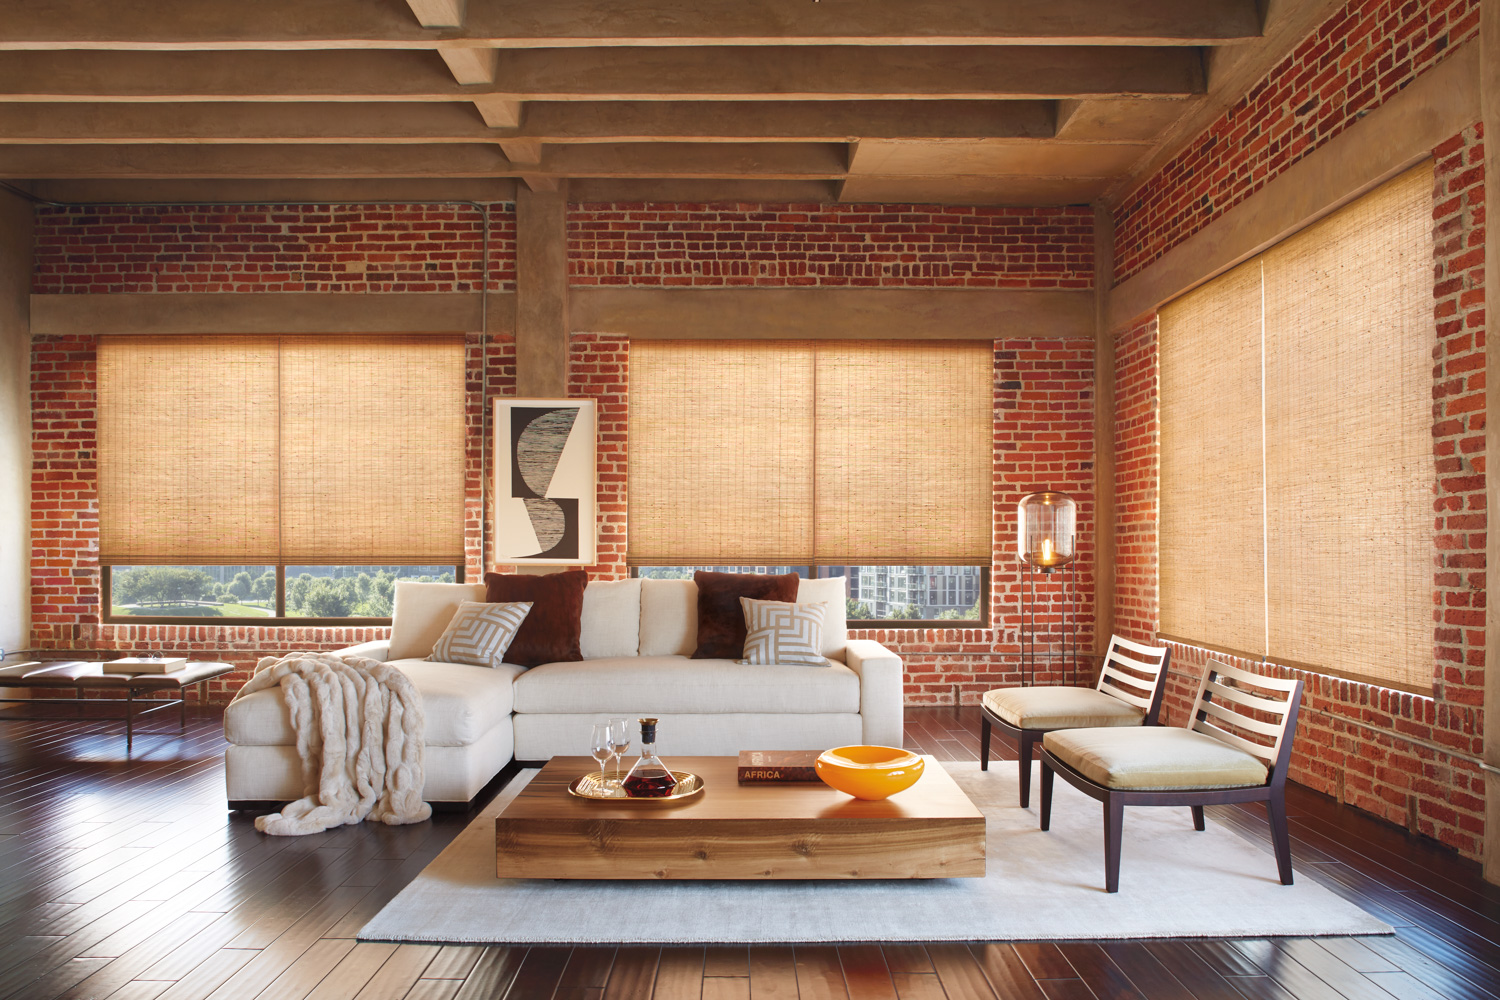 Living room with brick walls, wooden floors, and NATURAL WOVEN WOOD ROMAN SHADES.